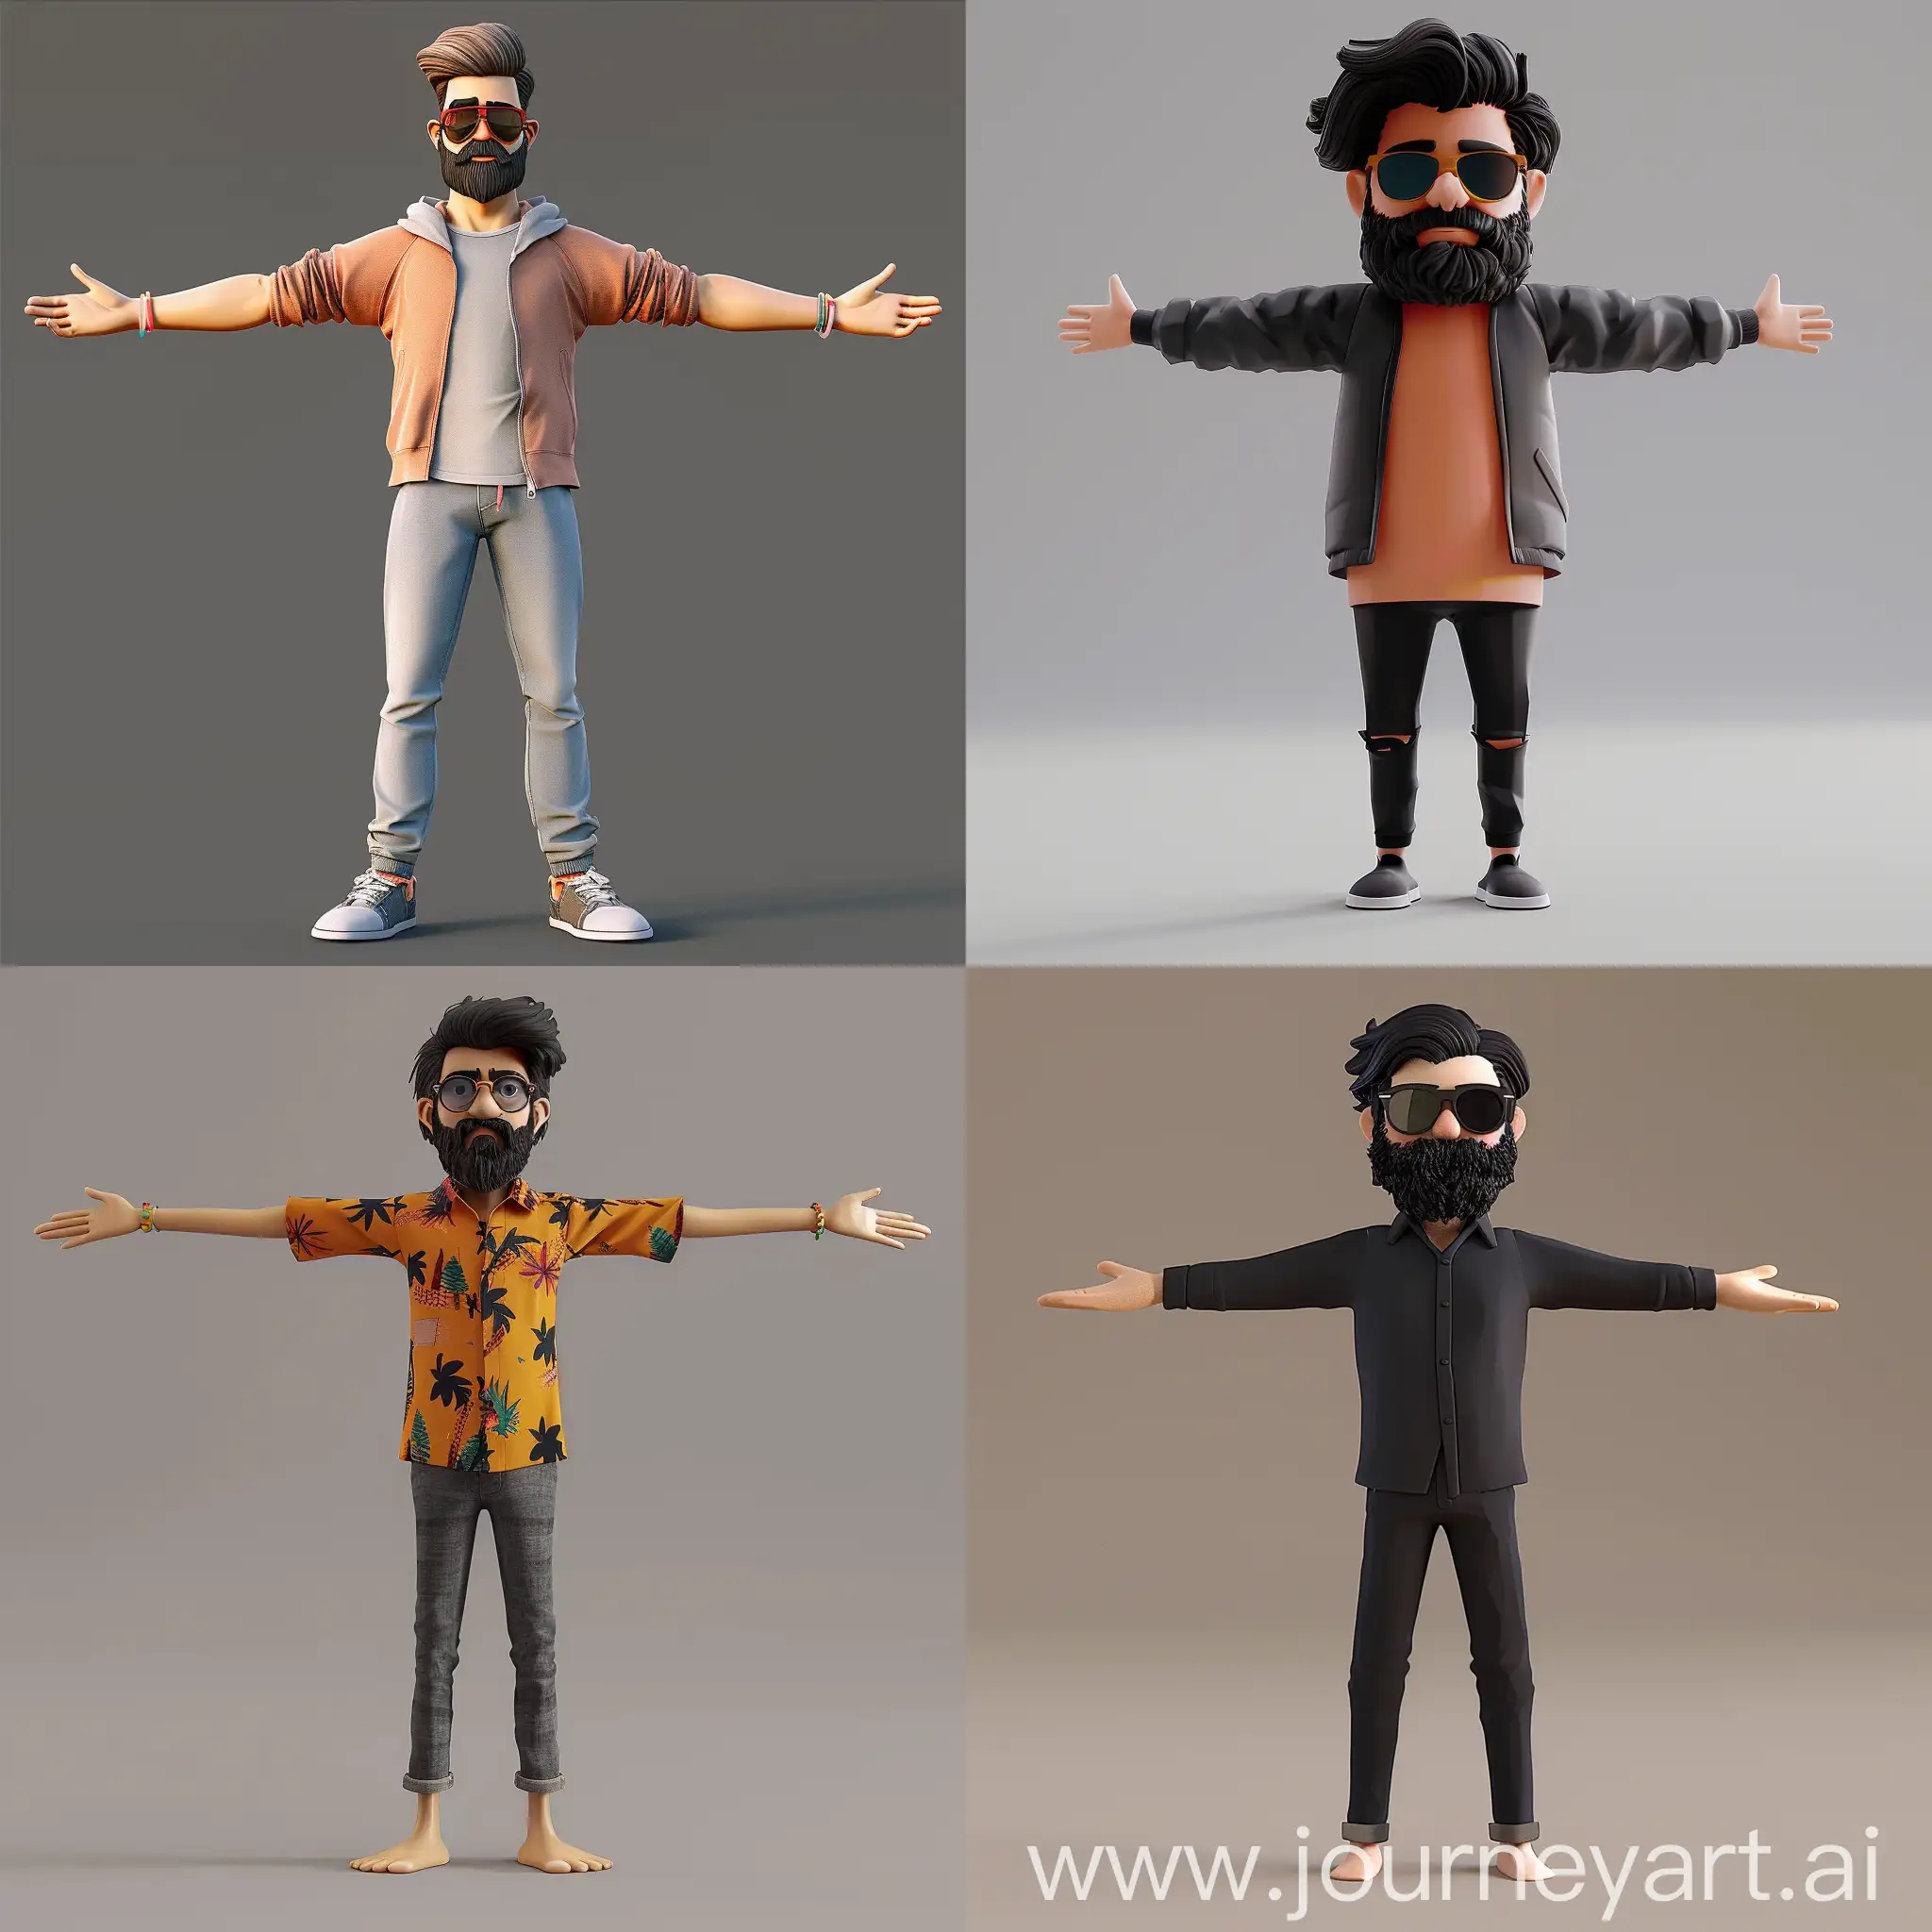 Create a 3D character model based on this image of a man. The character should be posed in a standard T-pose with arms extended horizontally and legs straight and parallel. The character should have the same facial features, hairstyle, beard, sunglasses, and clothing as depicted in the image. Ensure that the lower half of the body, including the legs and feet, are accurately generated and proportionate to the upper half of the body. Maintain the style and color of the clothing. Provide a neutral background for clarity